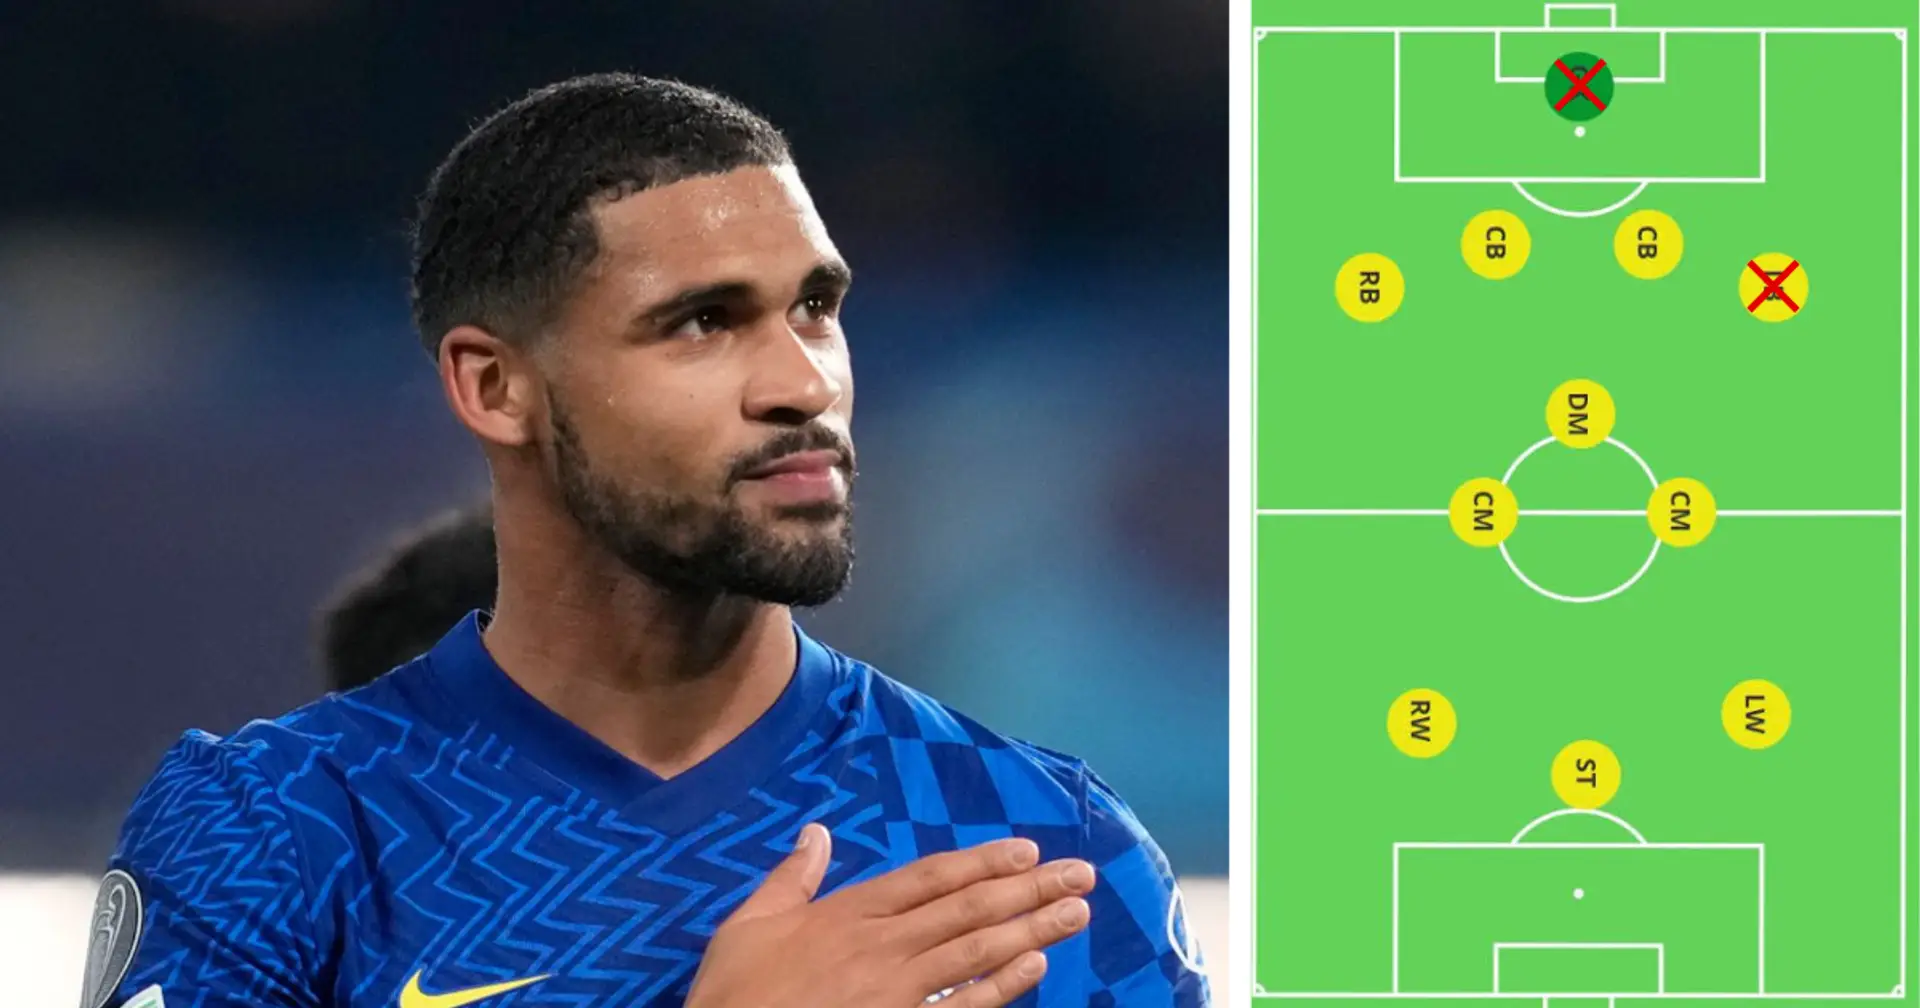 'I've played every position on the pitch except left-back, and keeper of course': Ruben Loftus-Cheek tells about his positional versatility 